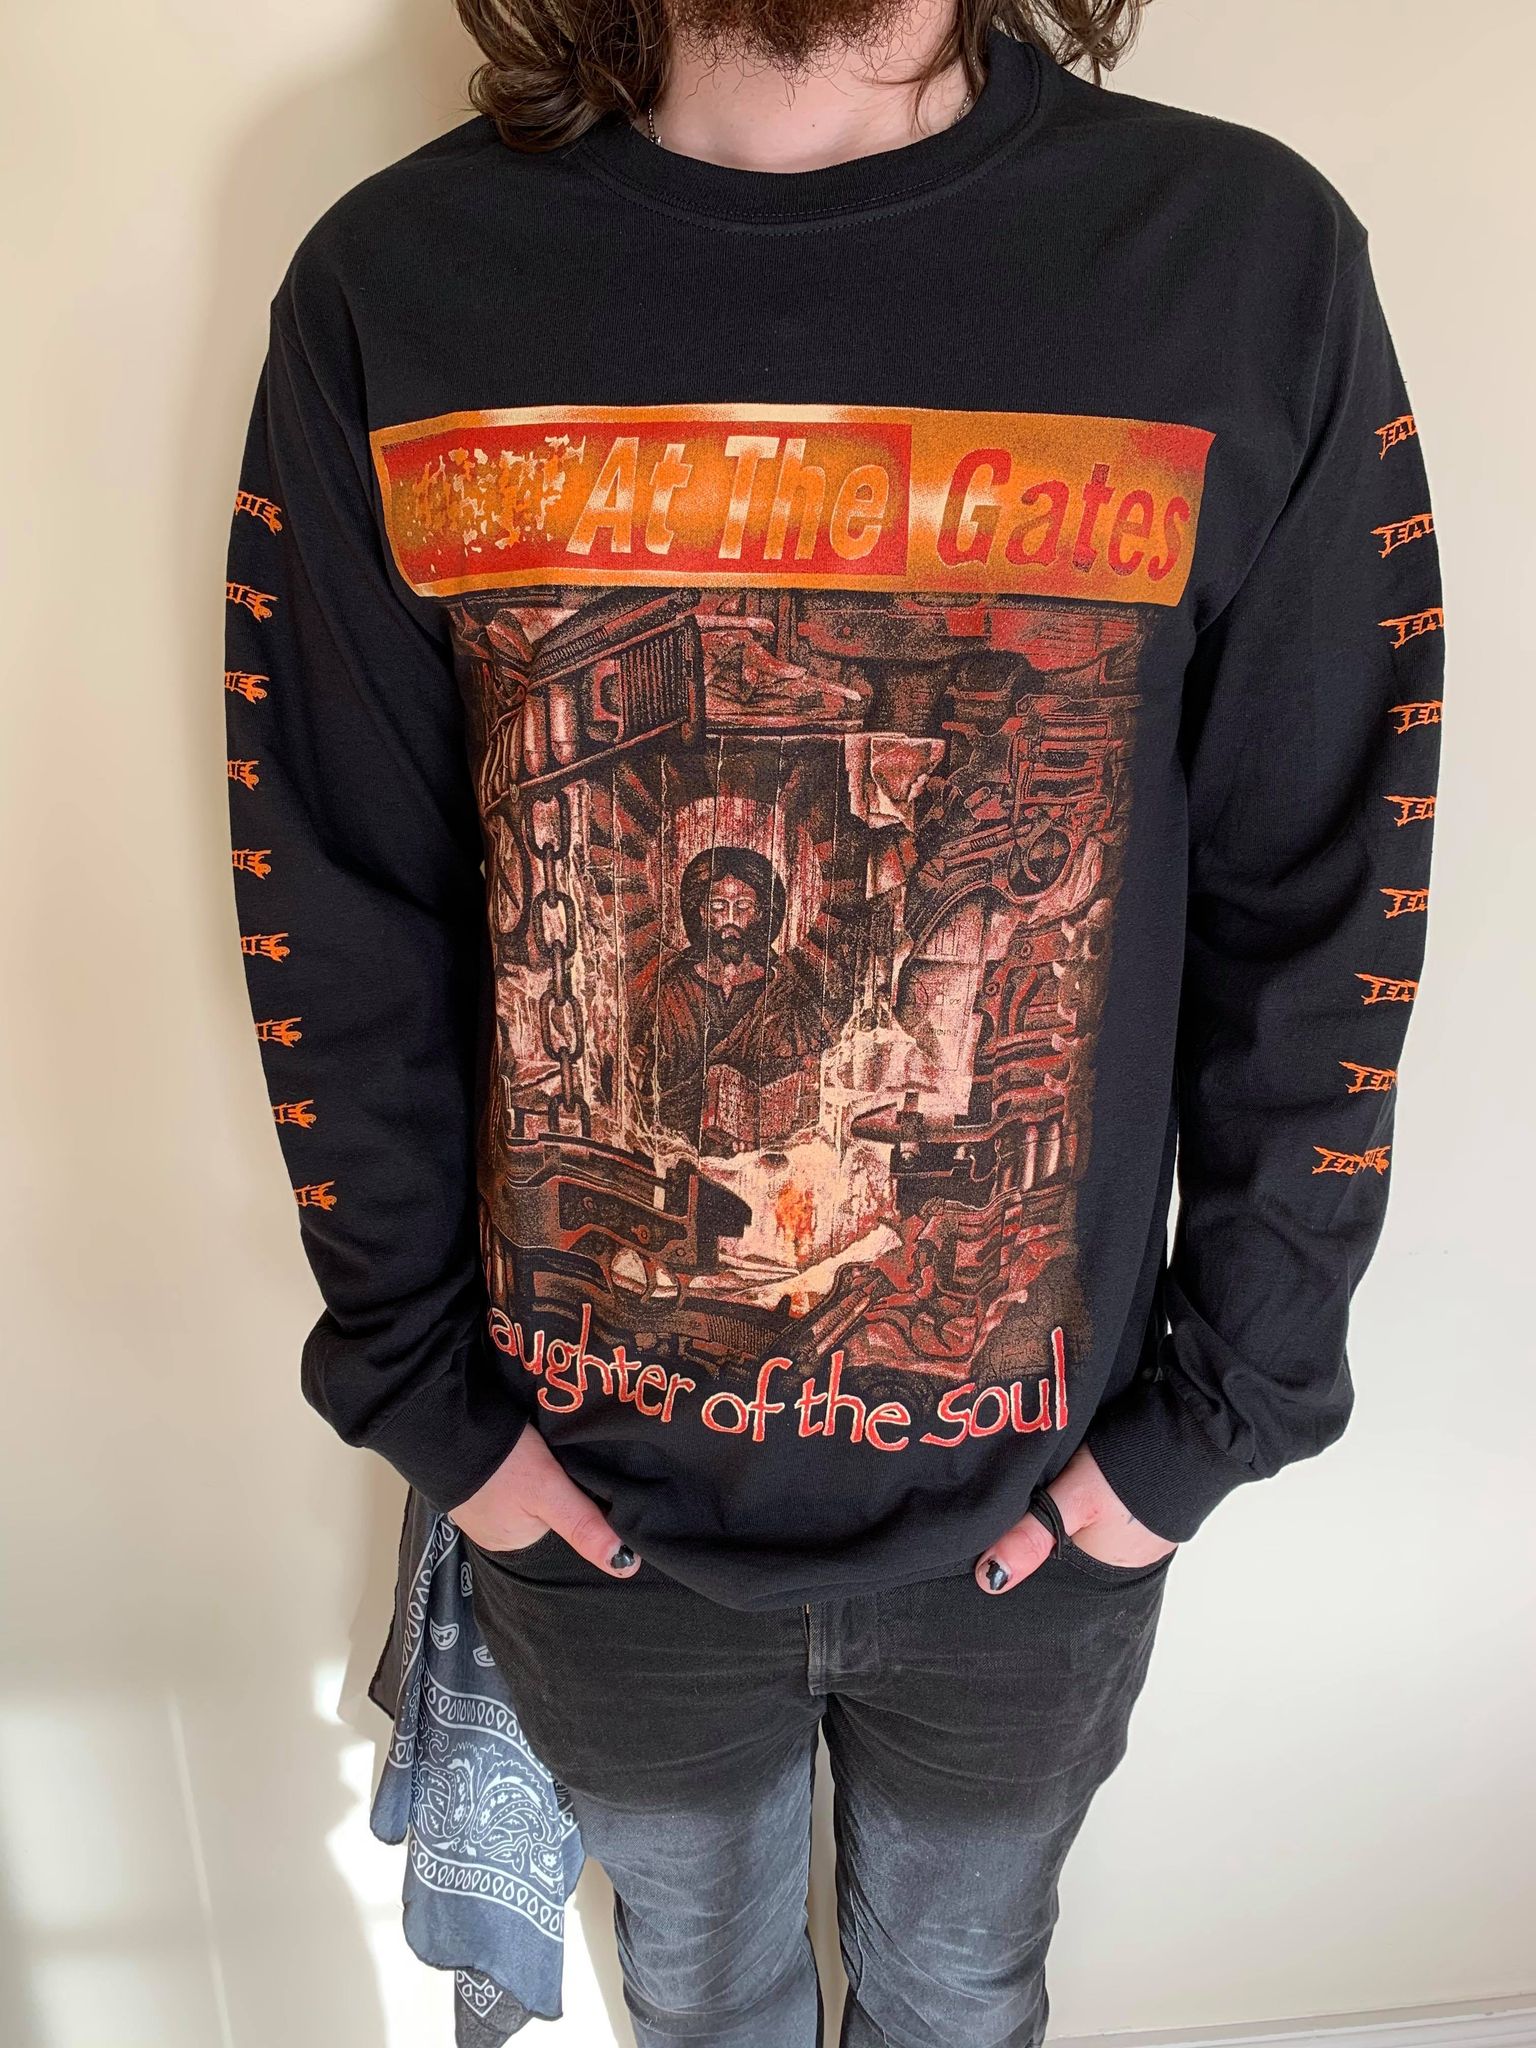 At The Gates "Slaughter Of The Soul" Long Sleeve T shirt